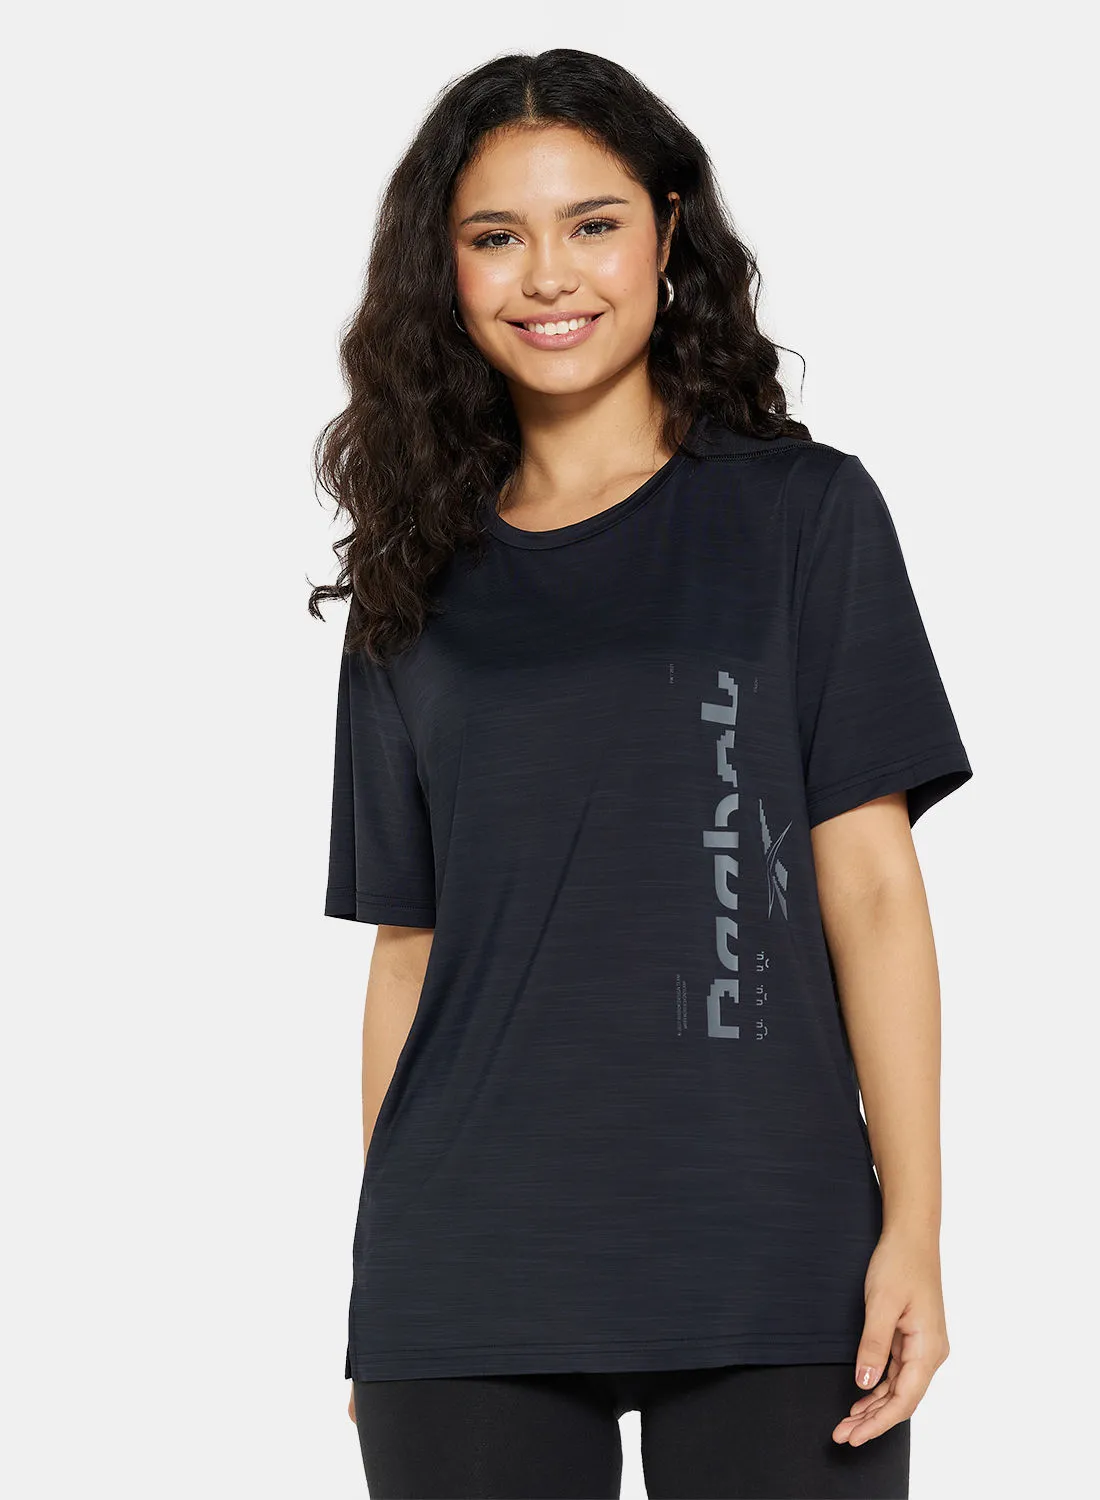 Reebok Activechill Graphic Move Training T-Shirt Black